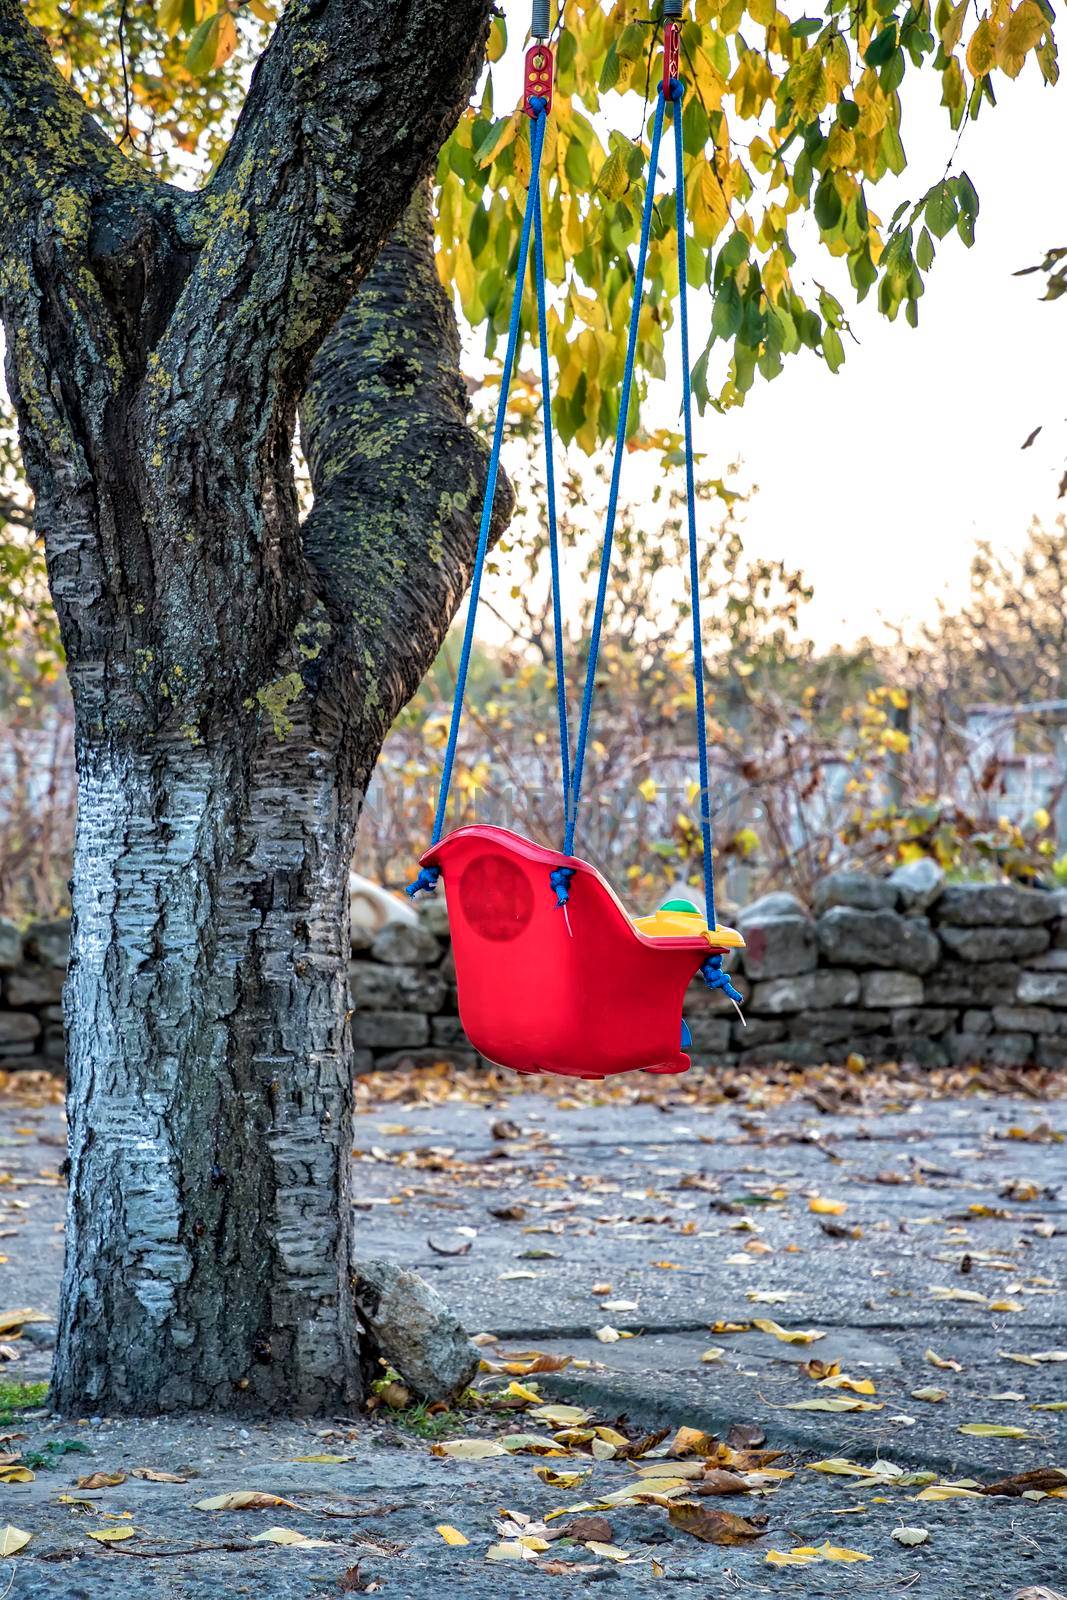 Empty red plastic swing at the tree in the garden, fun outdoor activity for kids